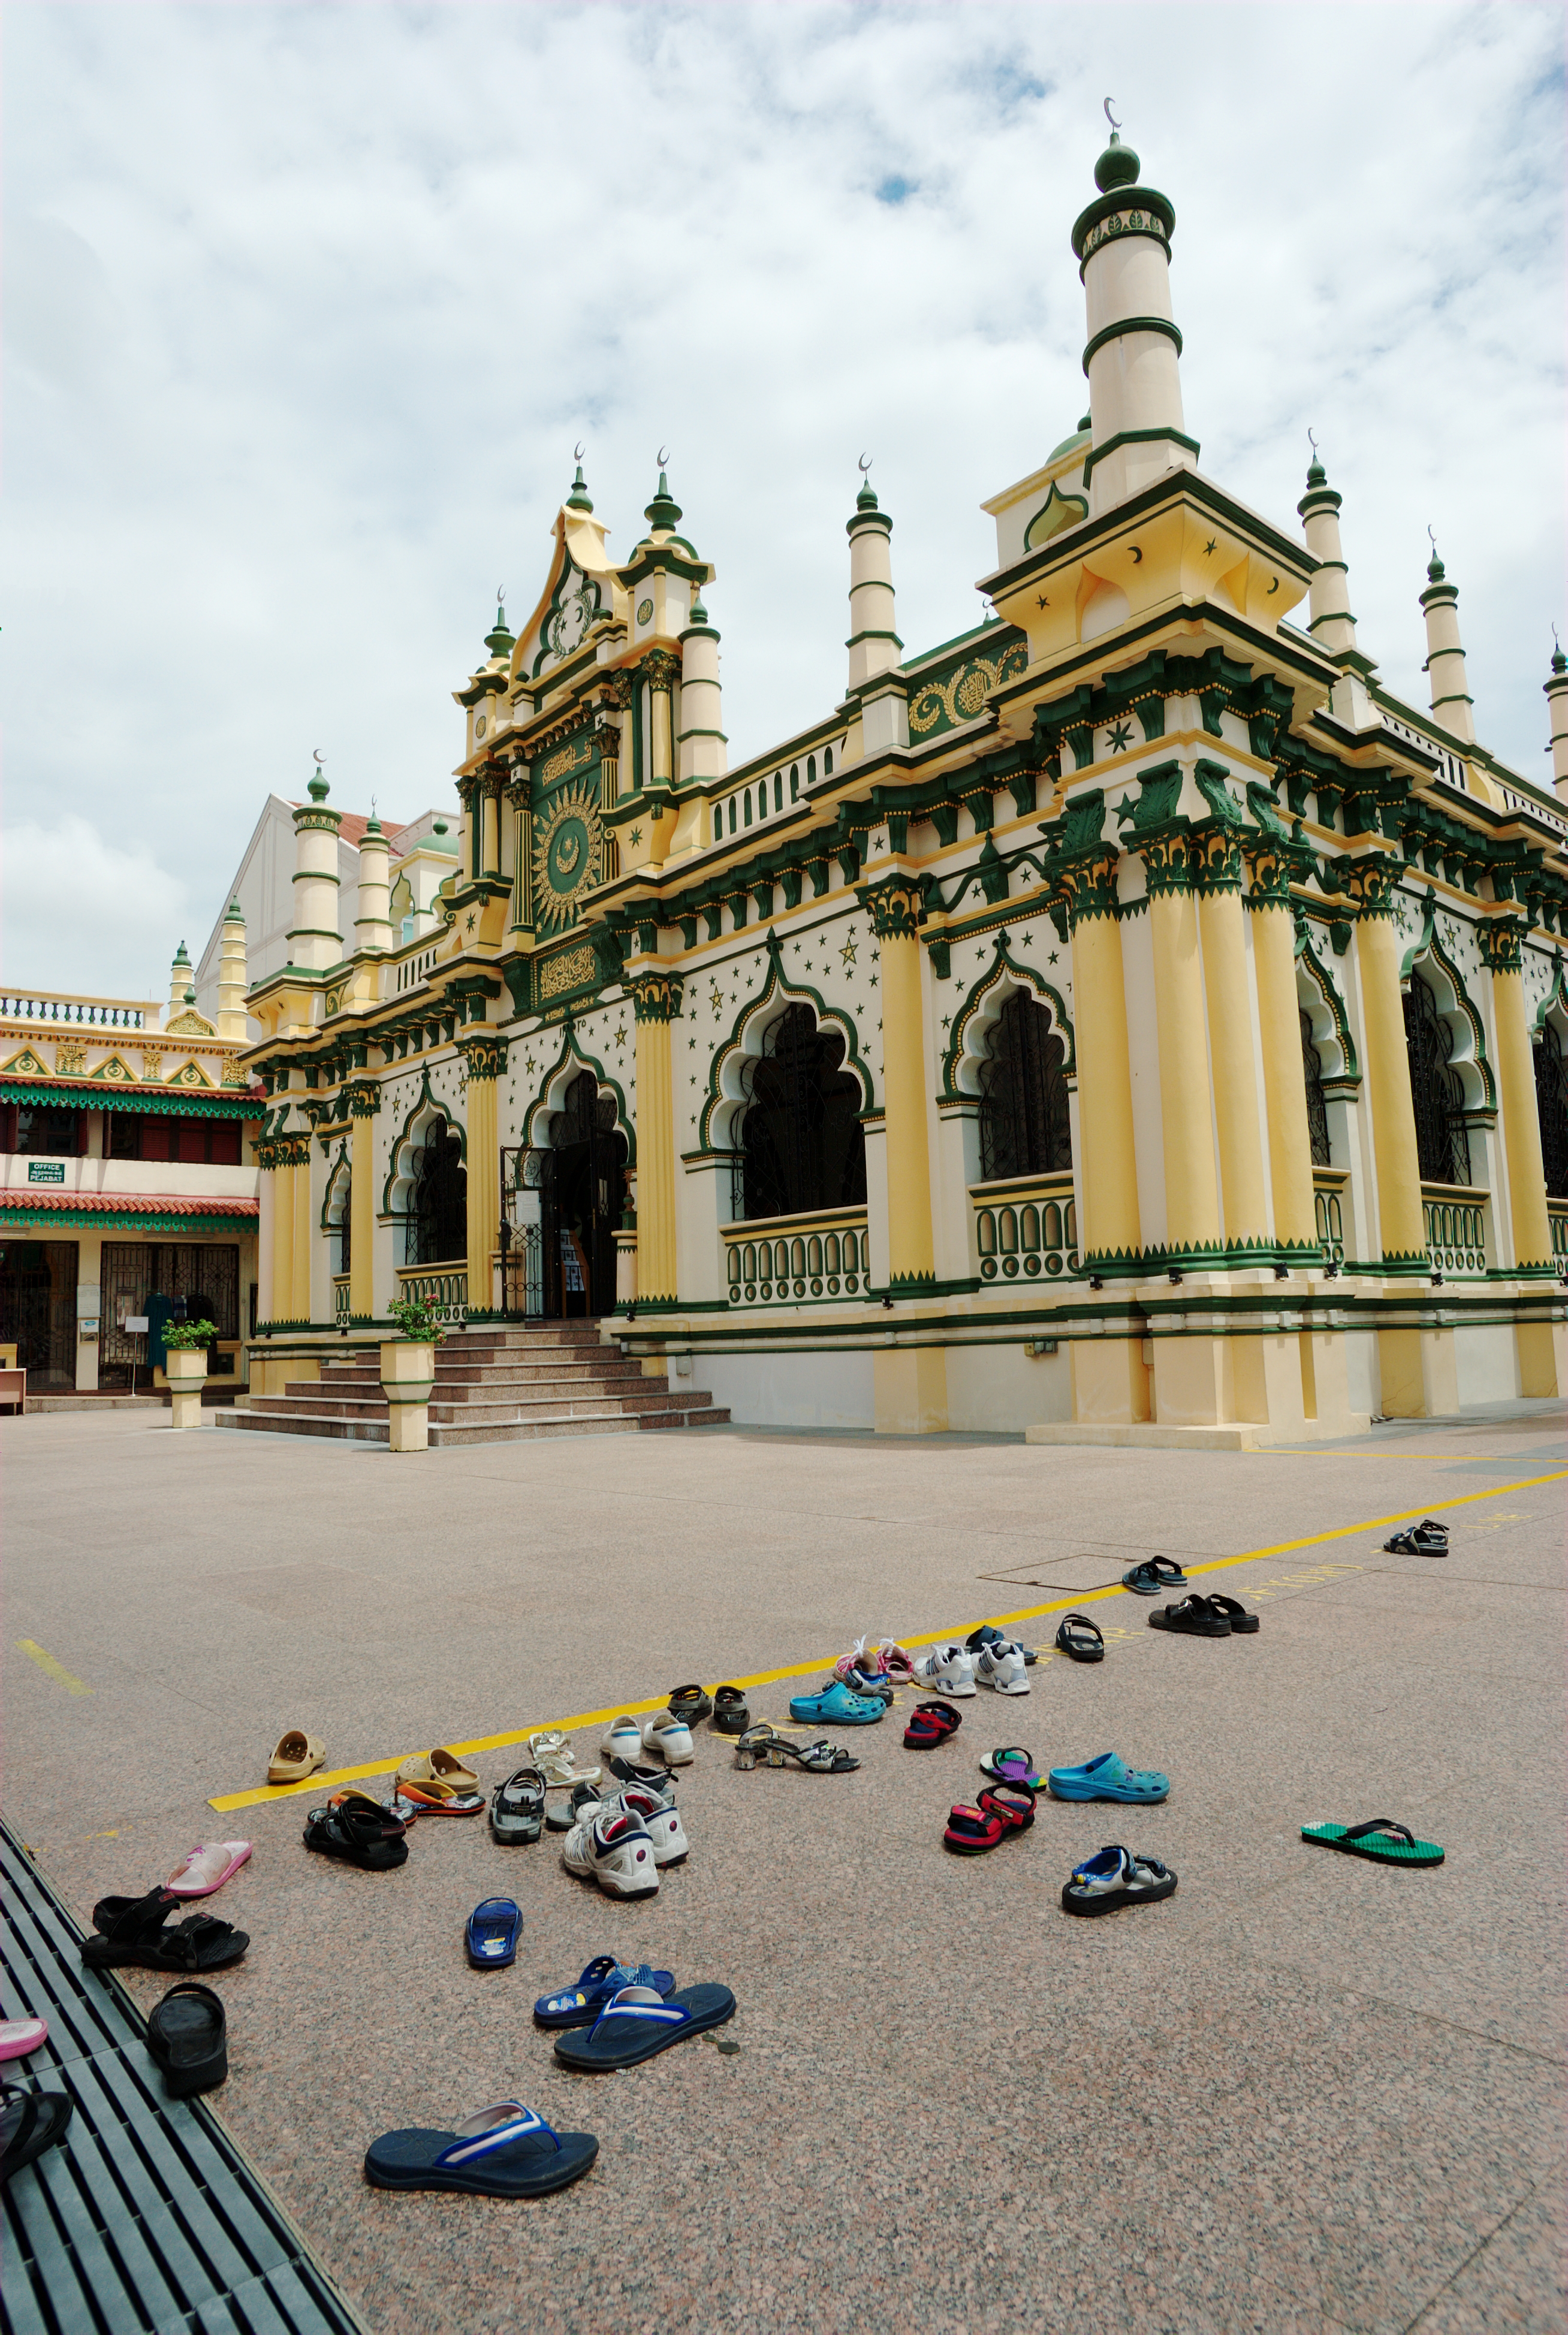 File:Shoes at the entrance of a temple.jpg - Wikimedia Commons